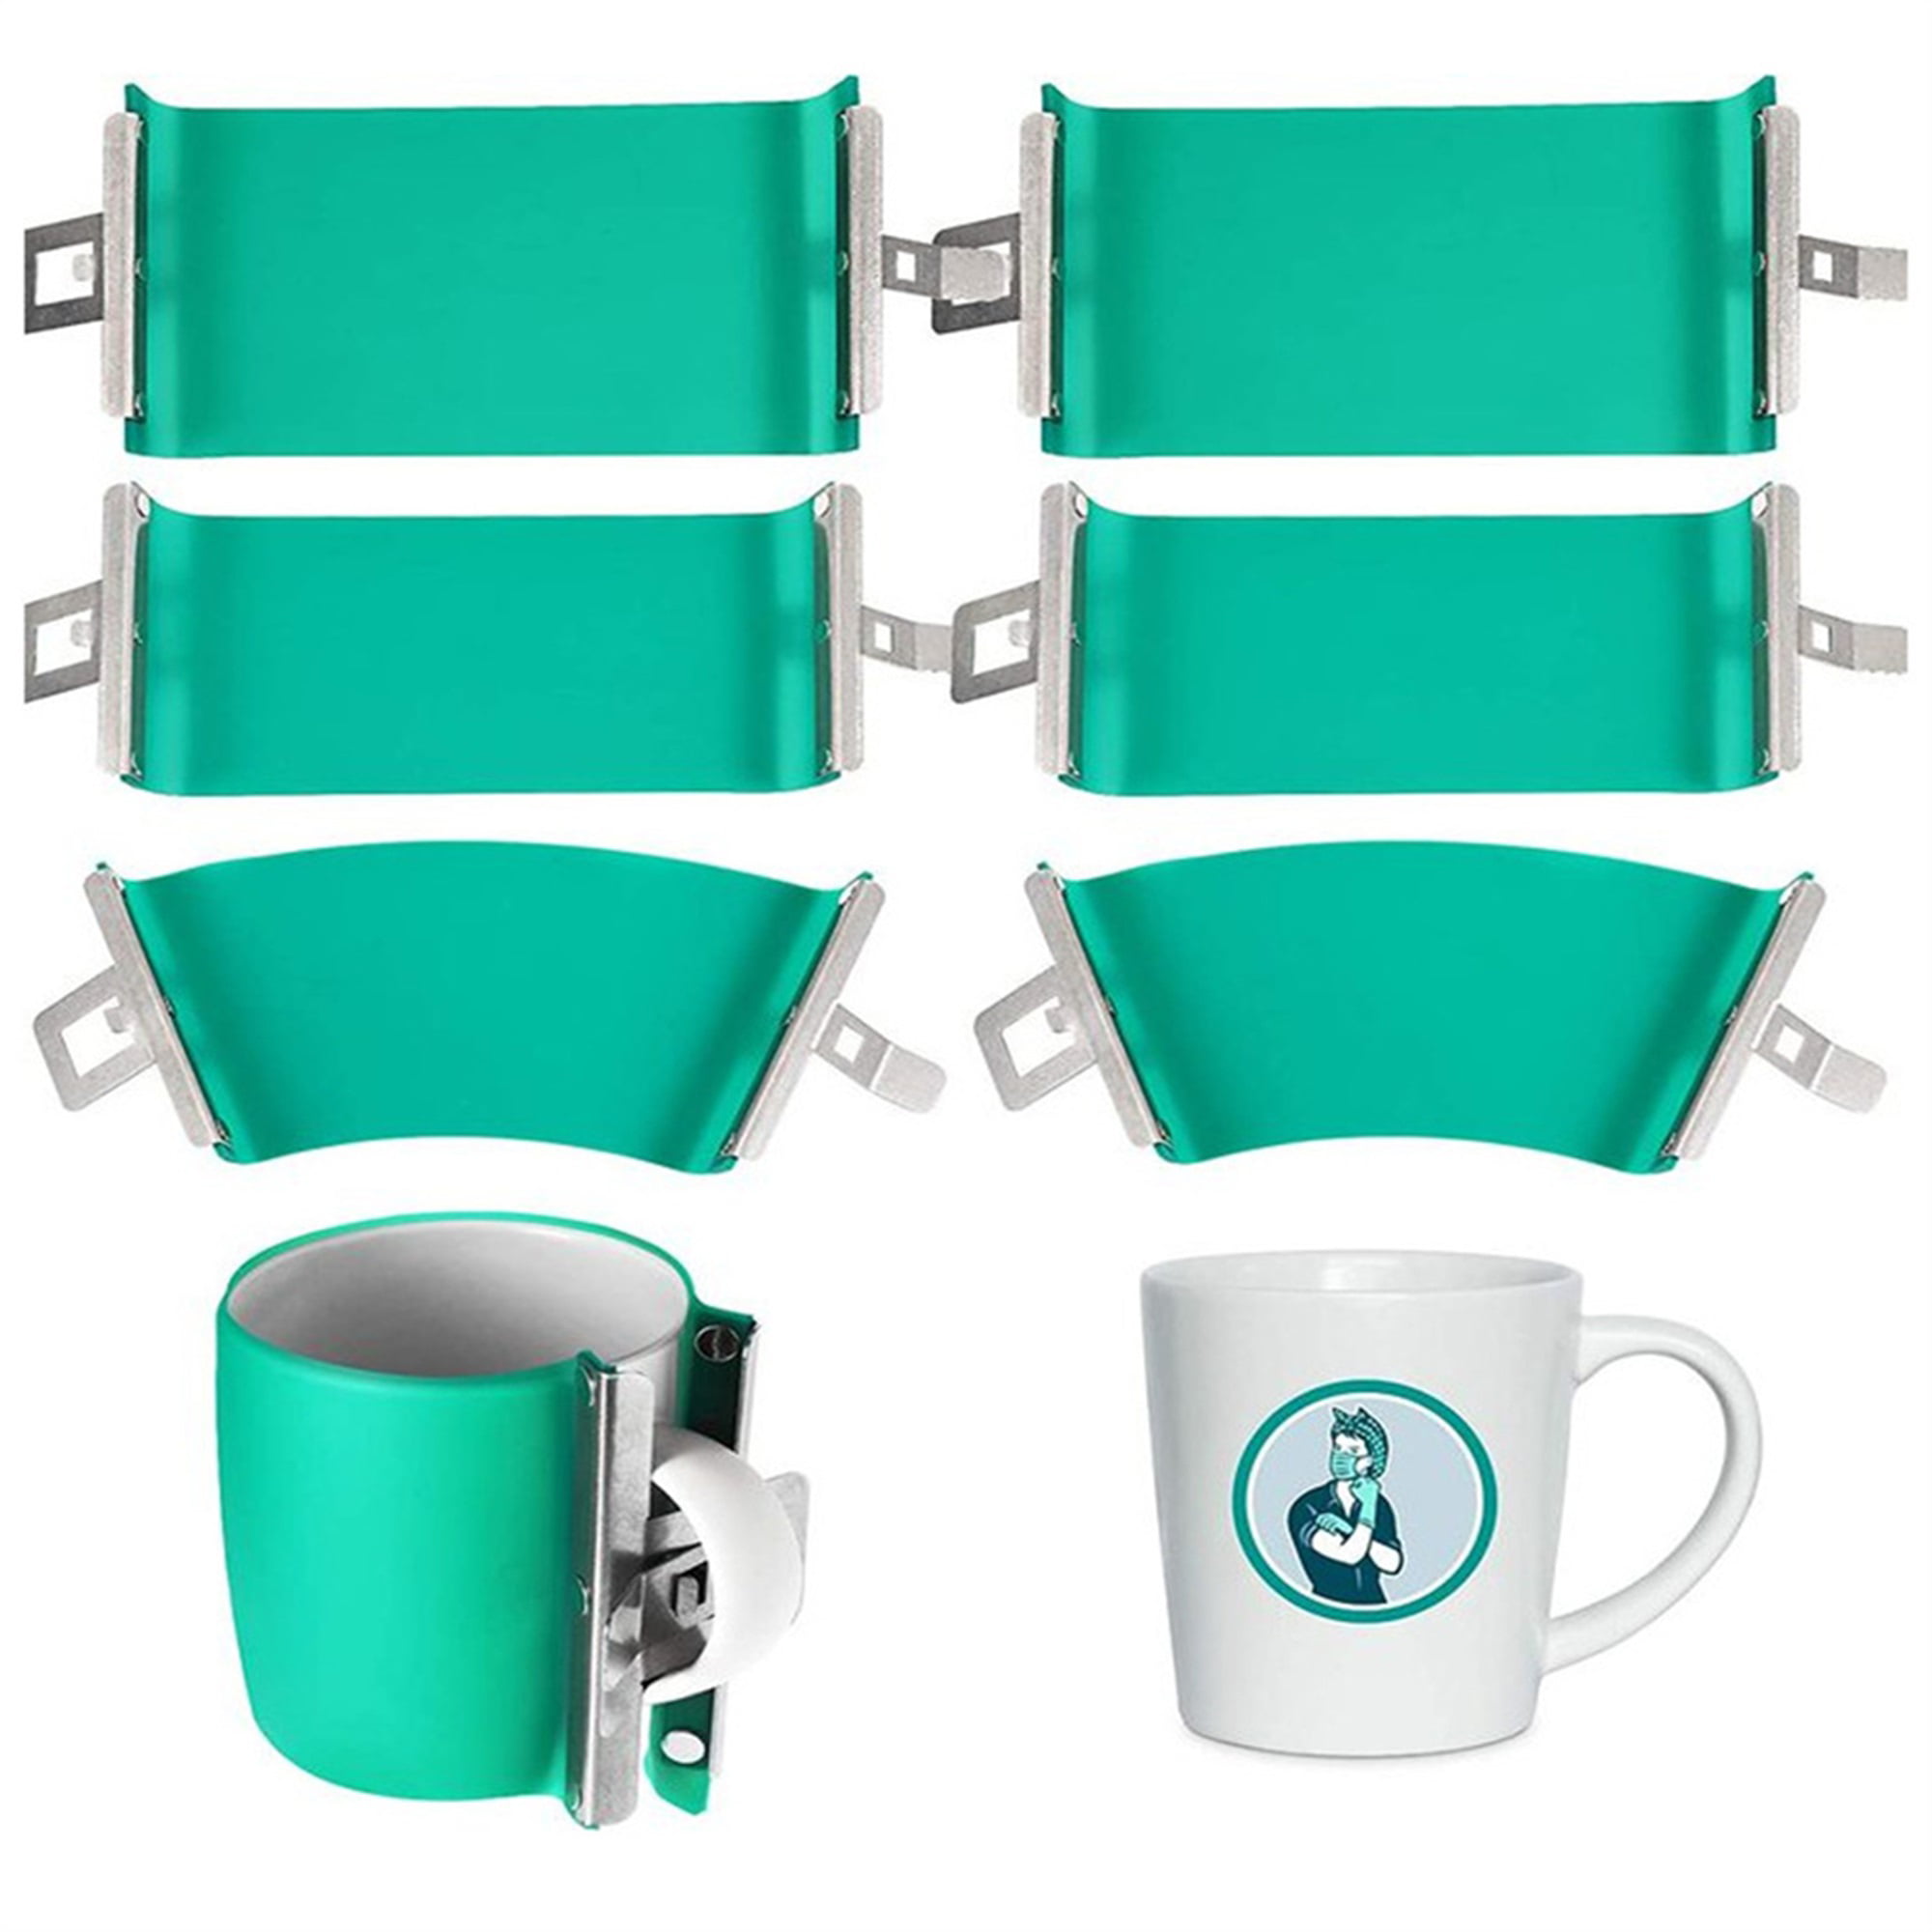 3D Sublimation Silicone 11oz Cup Clamp Mug Wrap Cup Fixture for Printing 